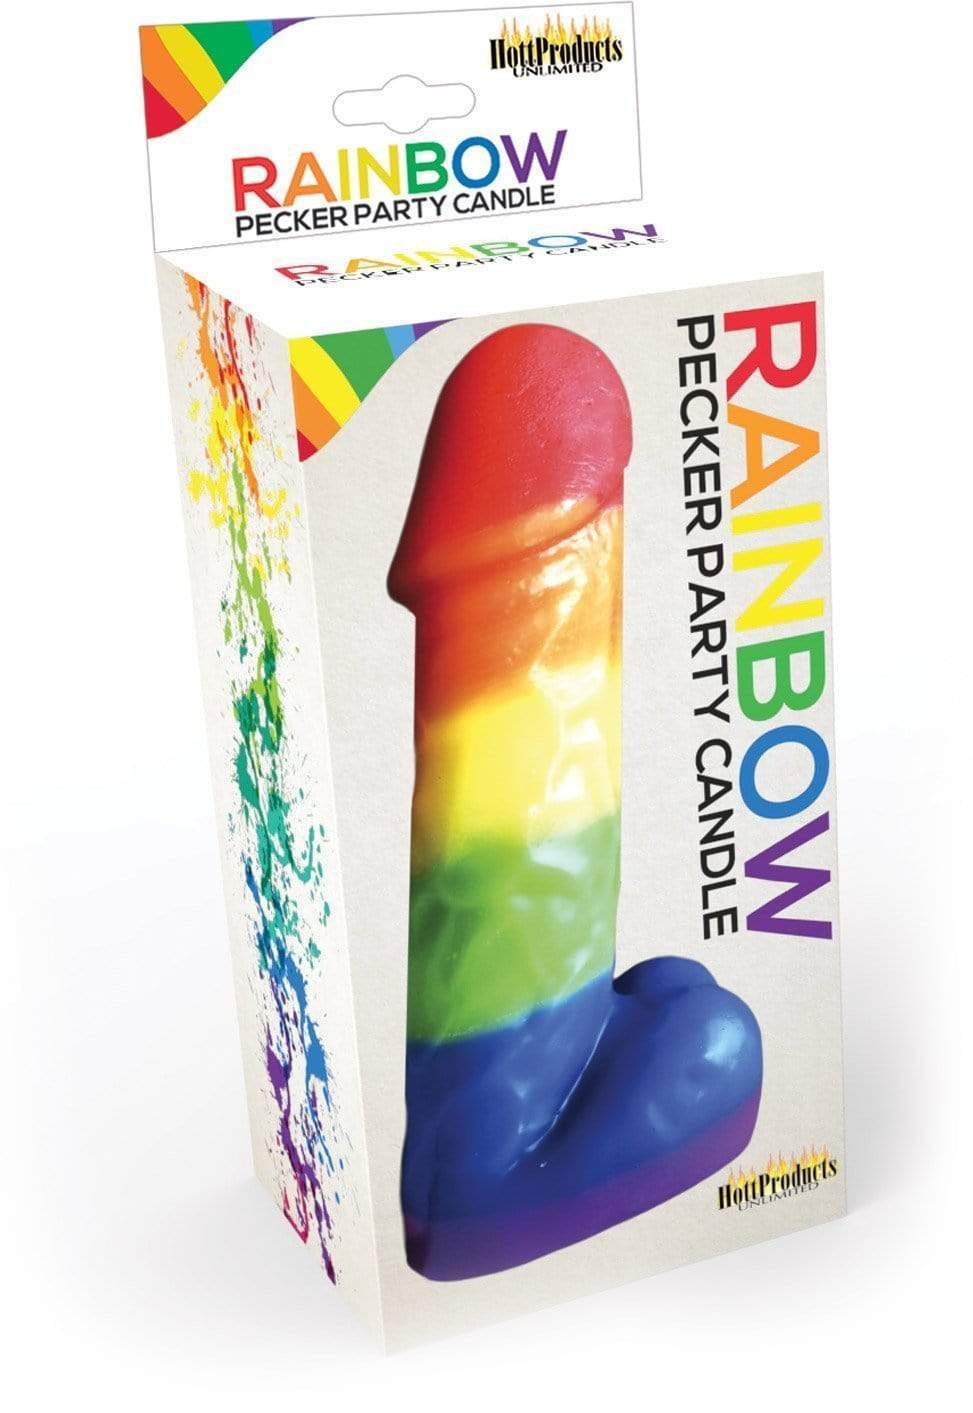 rainbow pecker party candle 7